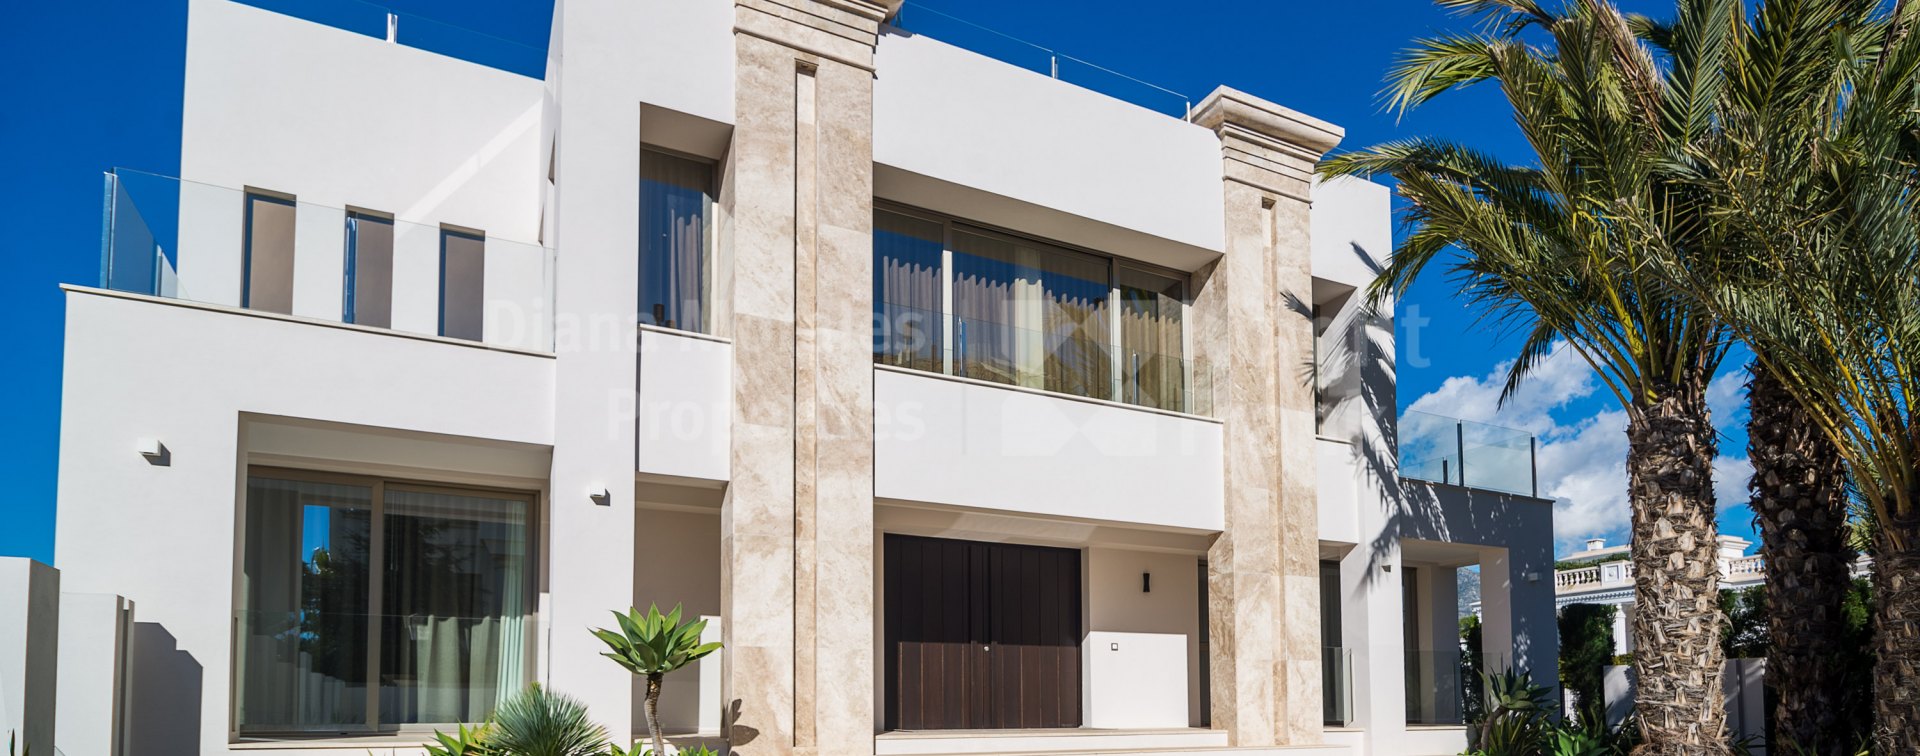 Marbella Golden Mile, Newly built contemporary villa within walking distance to the beach